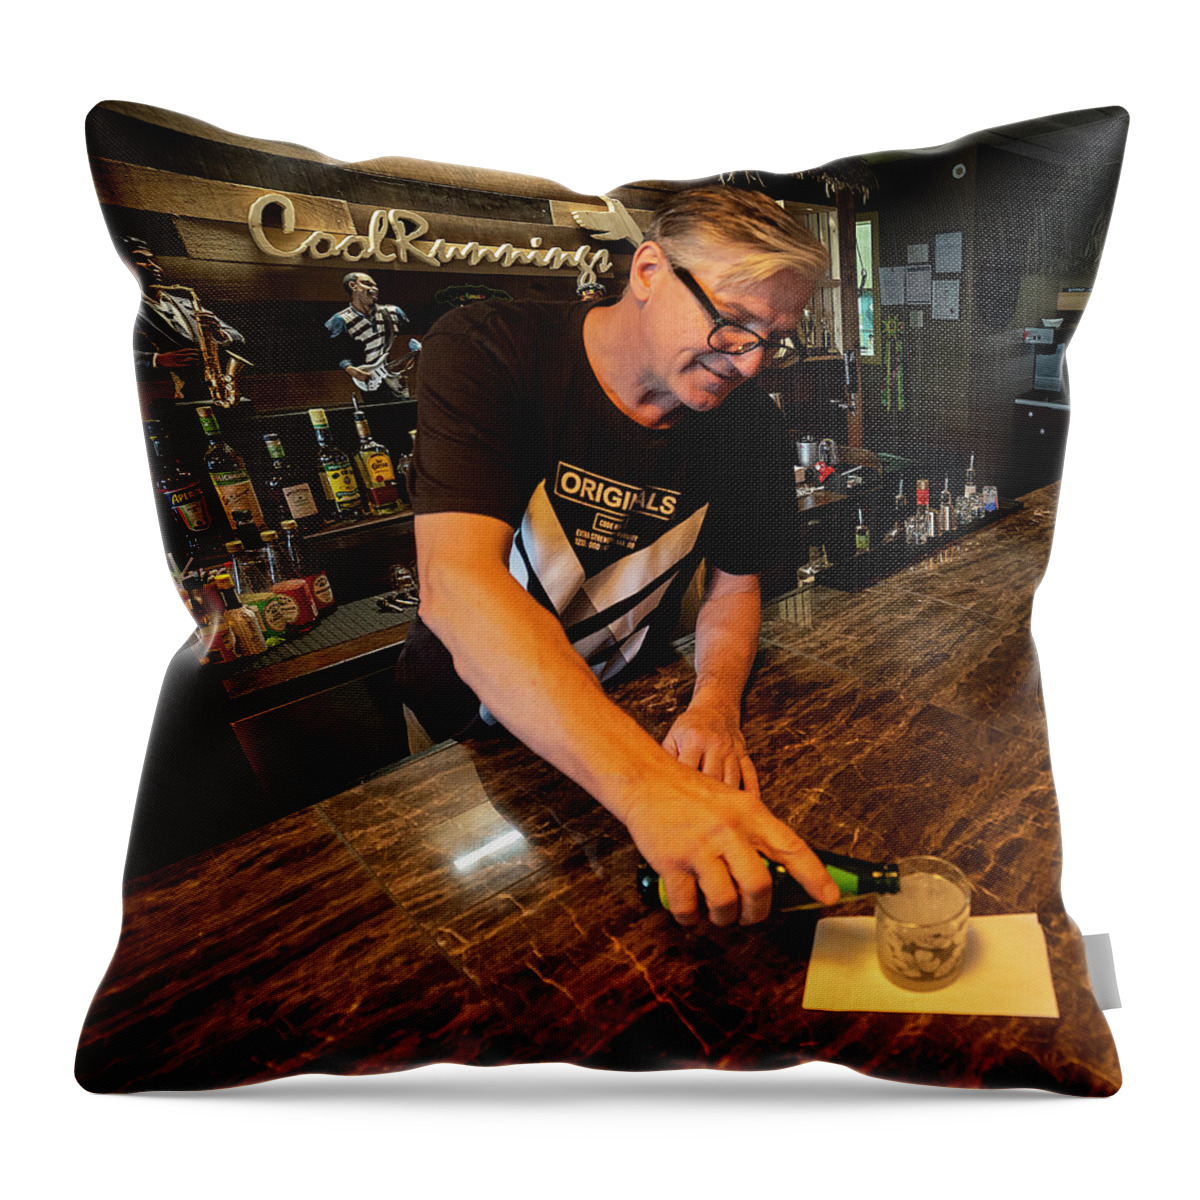 Cool Runnings Bistro Throw Pillow featuring the photograph Cool Runnings Bistro by Jim Whitley